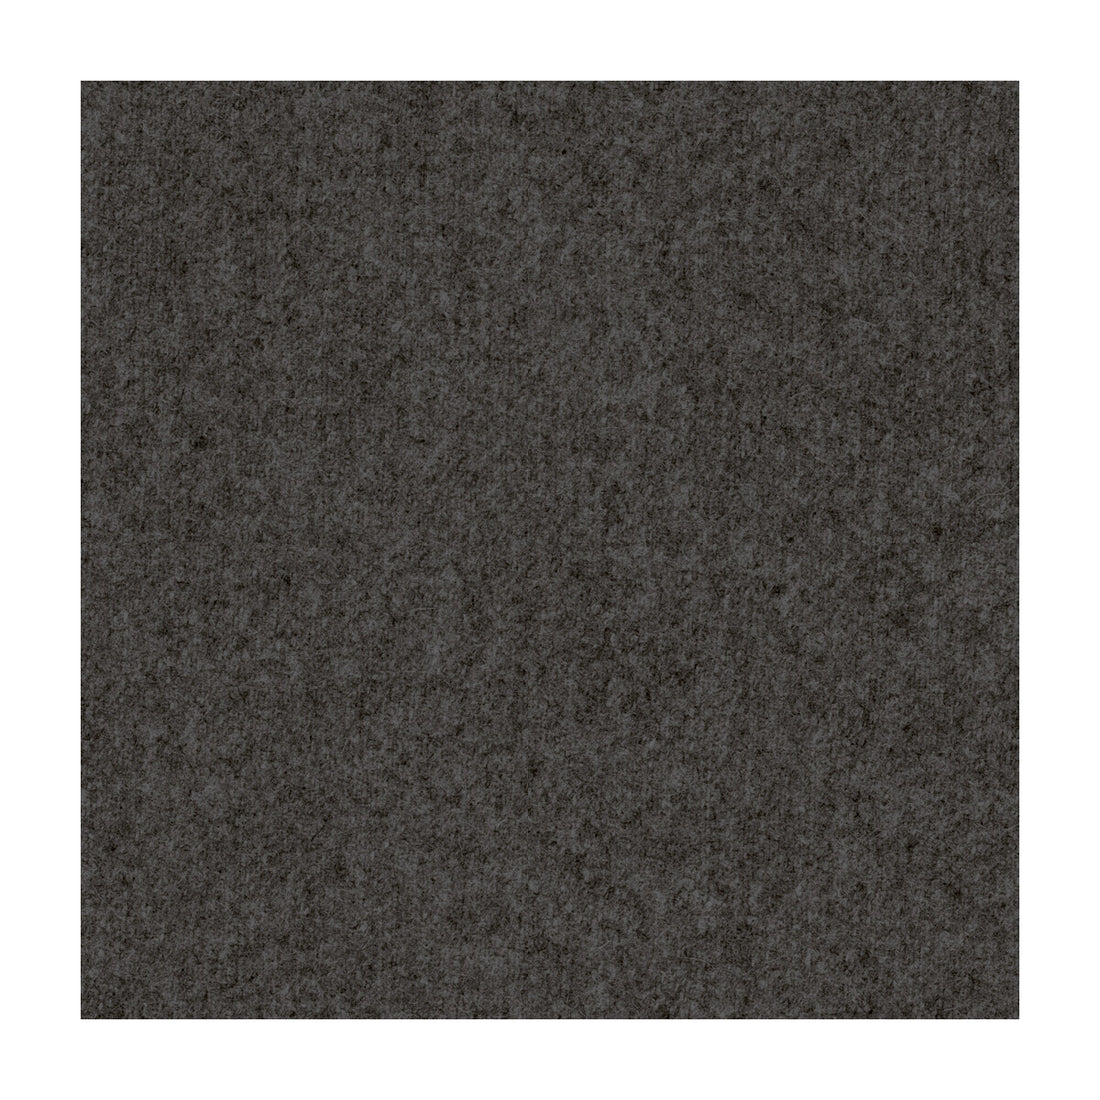 Jefferson Wool fabric in charcoal color - pattern 34397.2121.0 - by Kravet Contract